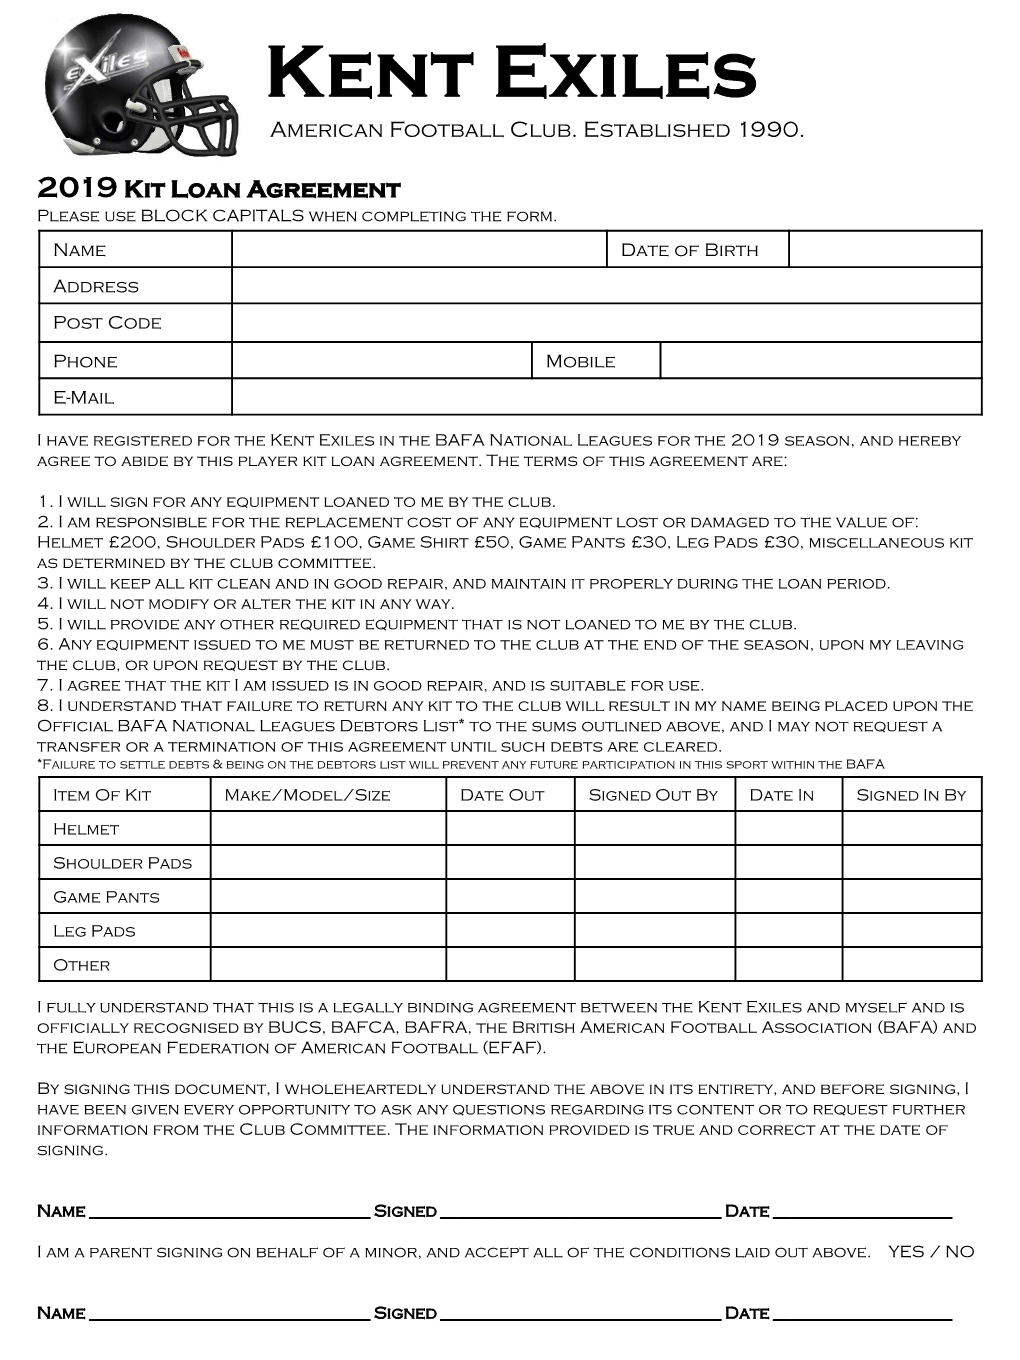 Kit Loan Agreement Please Use BLOCK CAPITALS When Completing the Form